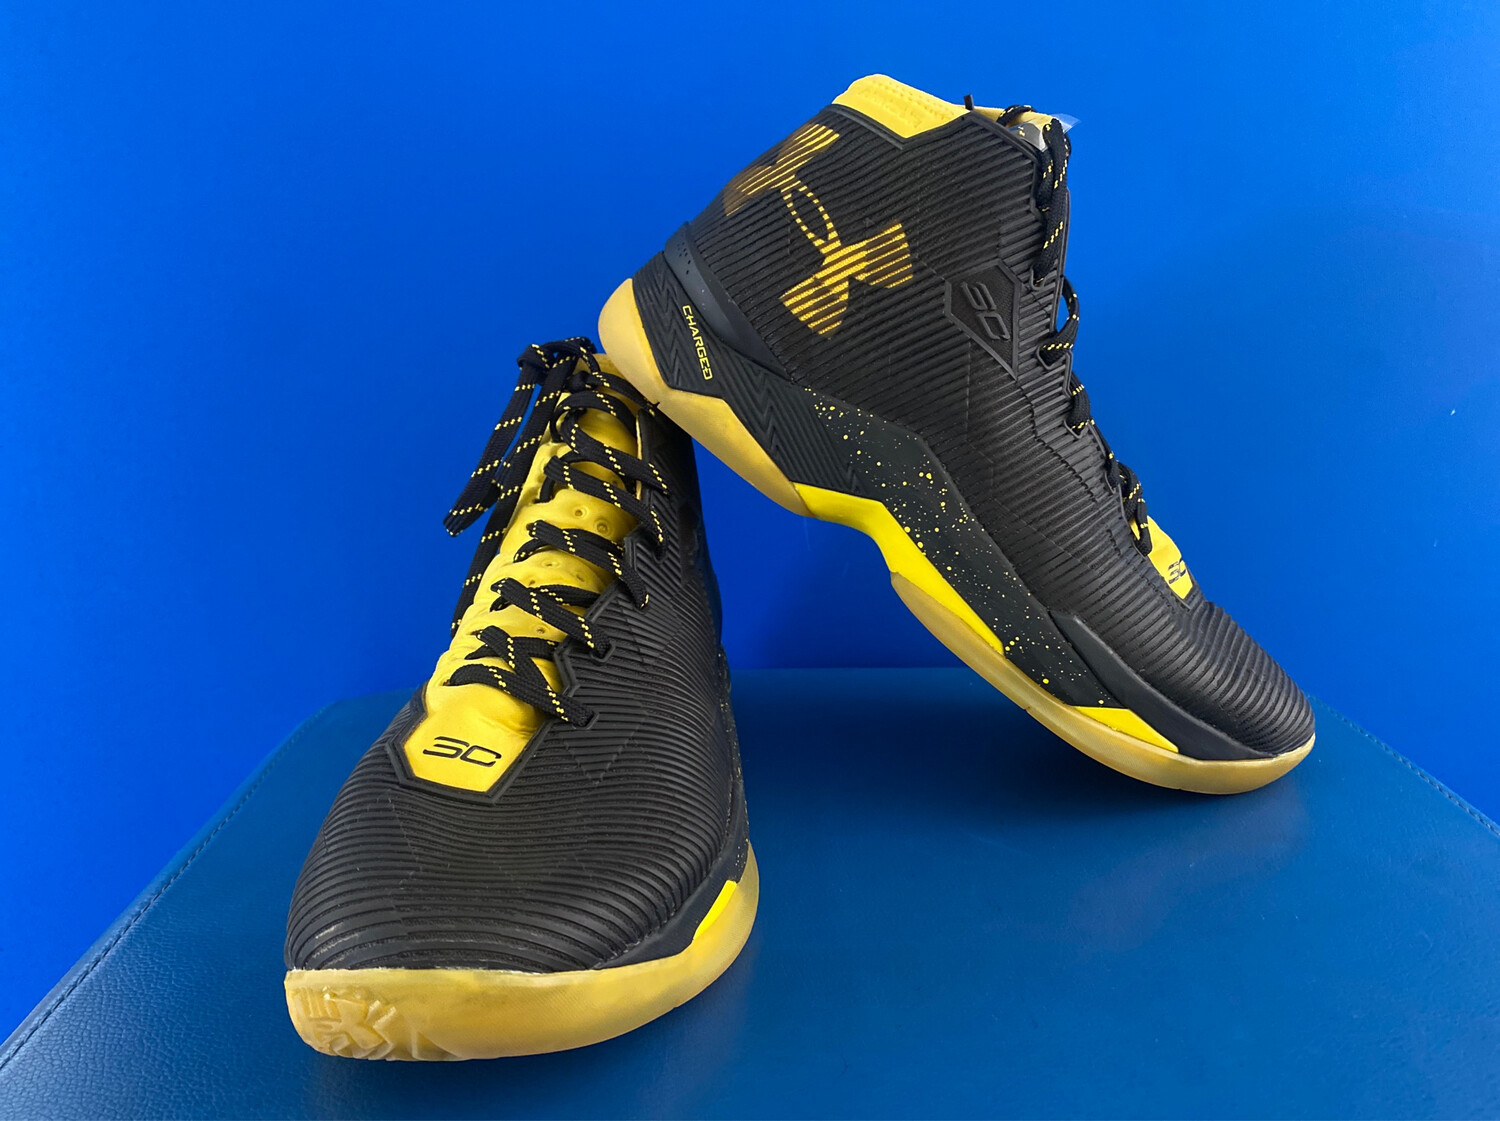 Under Armour Curry  Dark Knight Black Taxi Basketball Shoes US10 Black  Yellow (Near-new) (EC518)